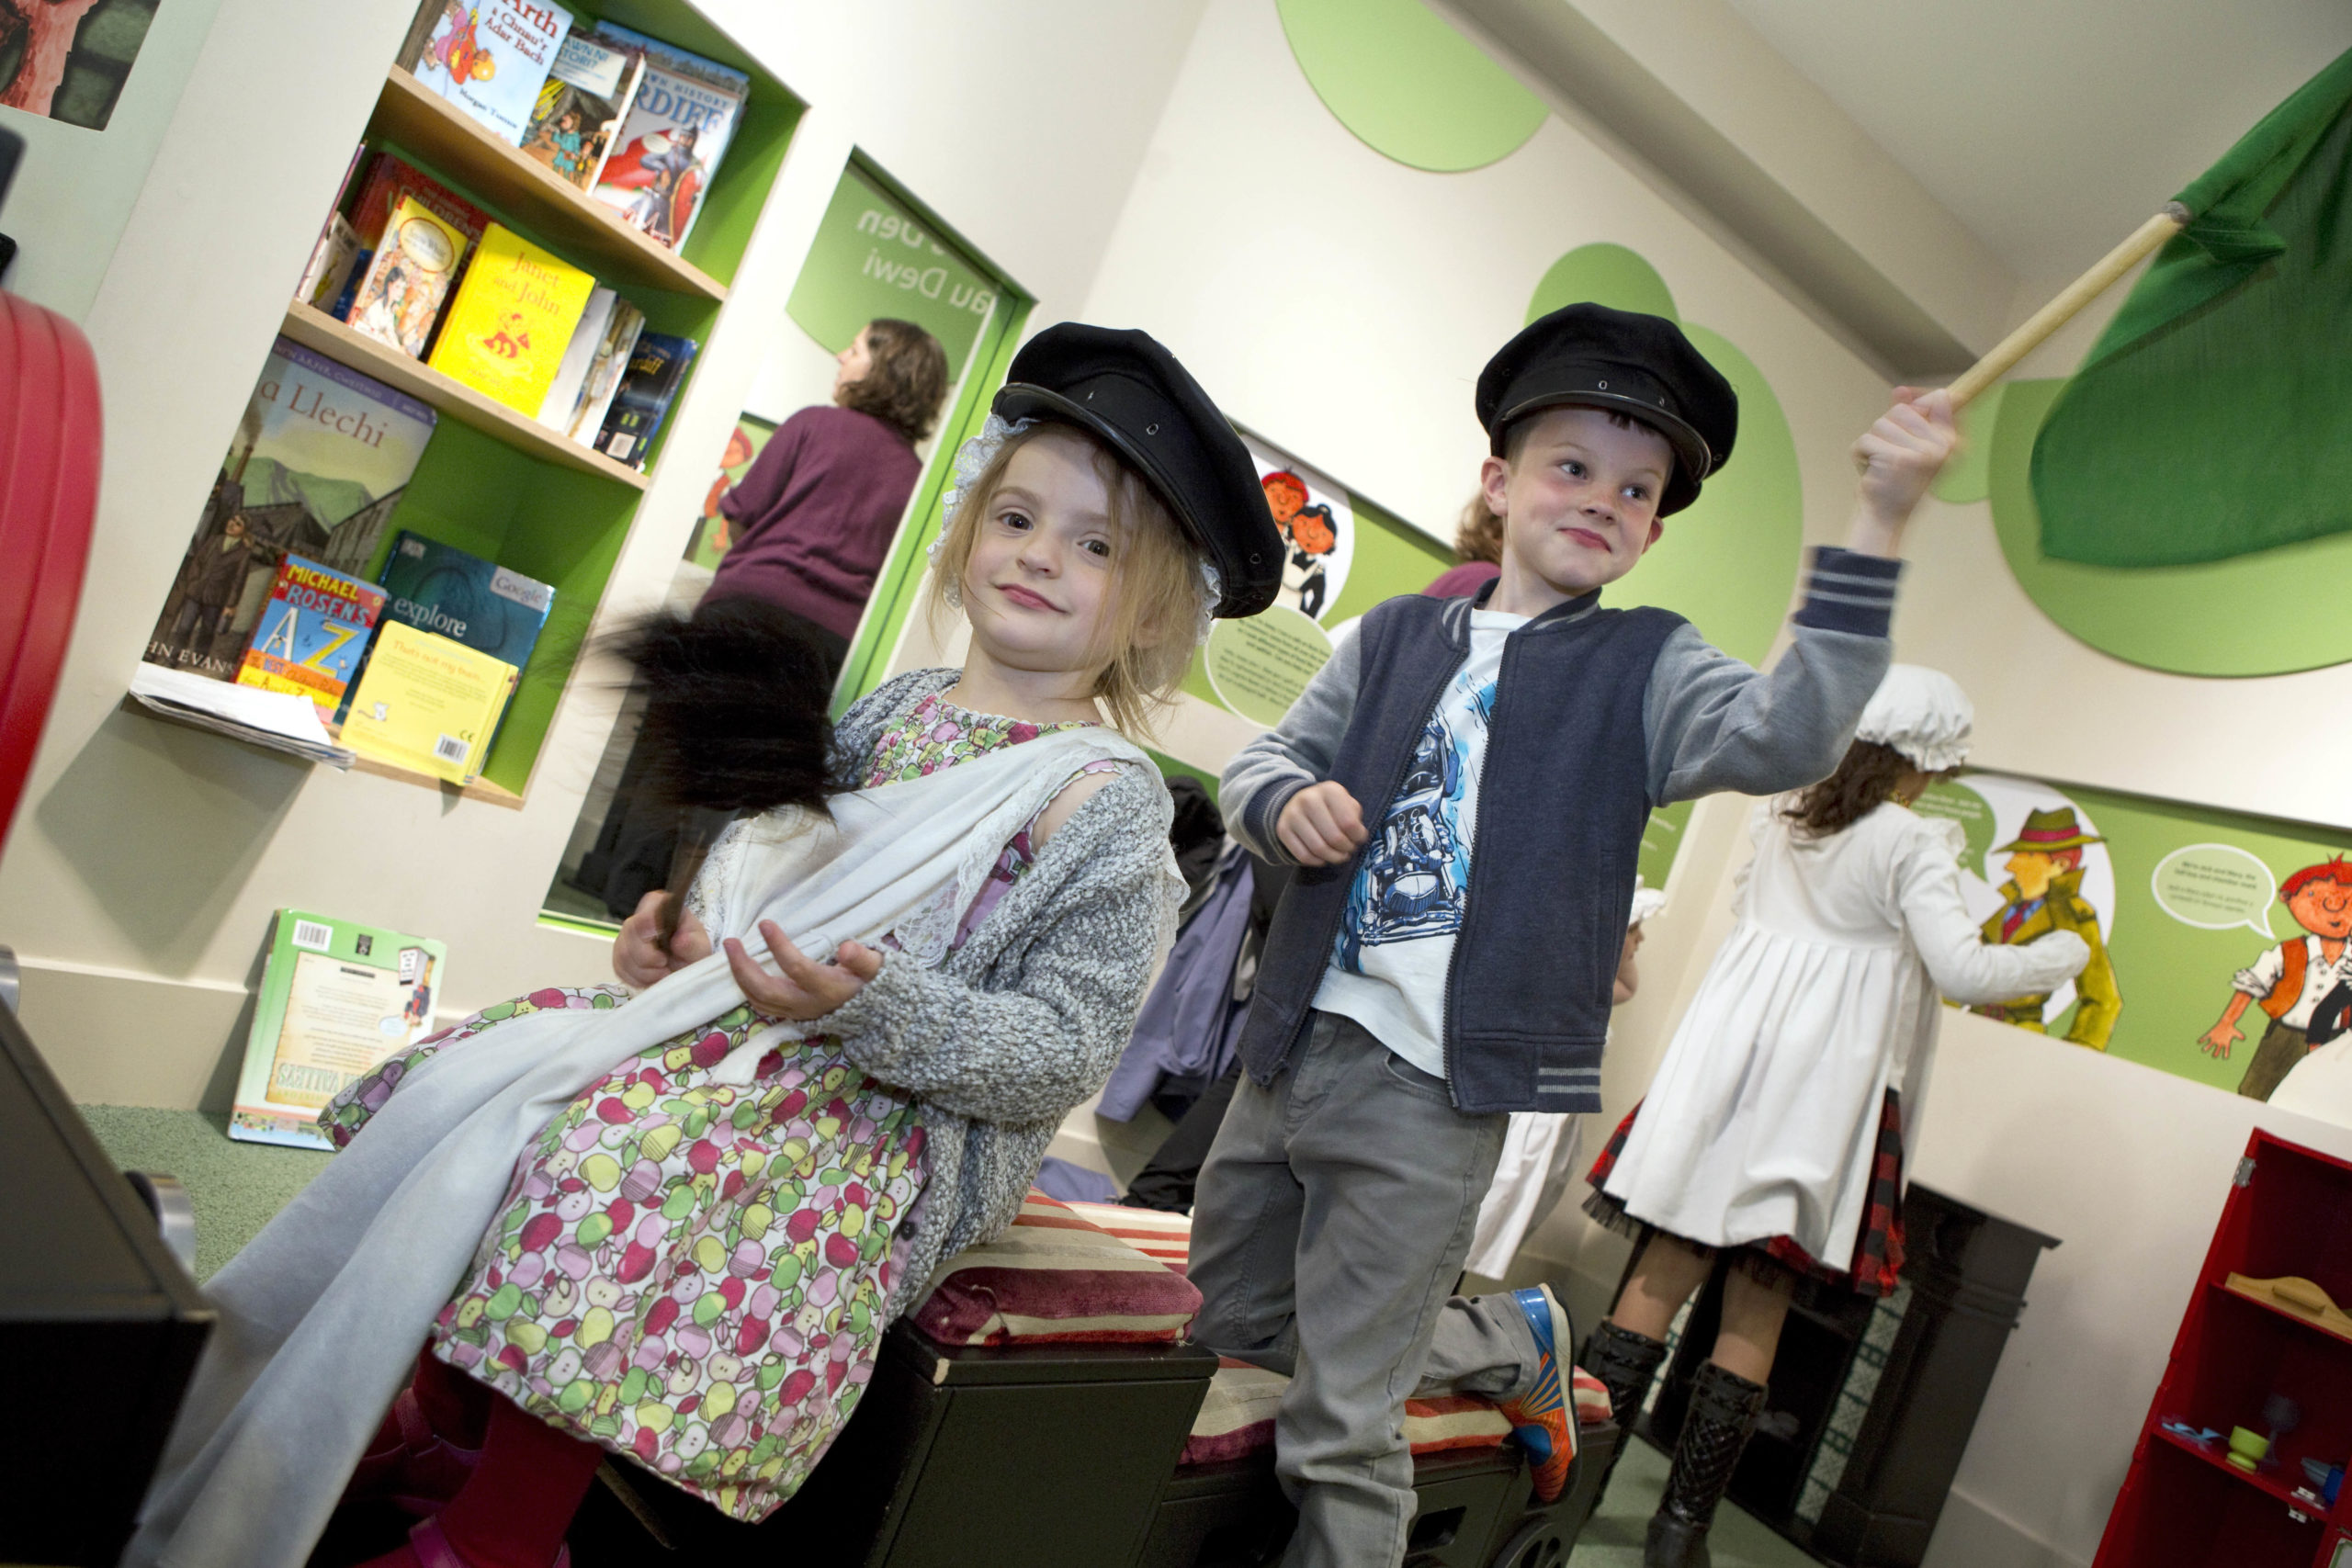 Two children in the Museum of Cardiff wearing hats, one waving a flag and the other a duster.